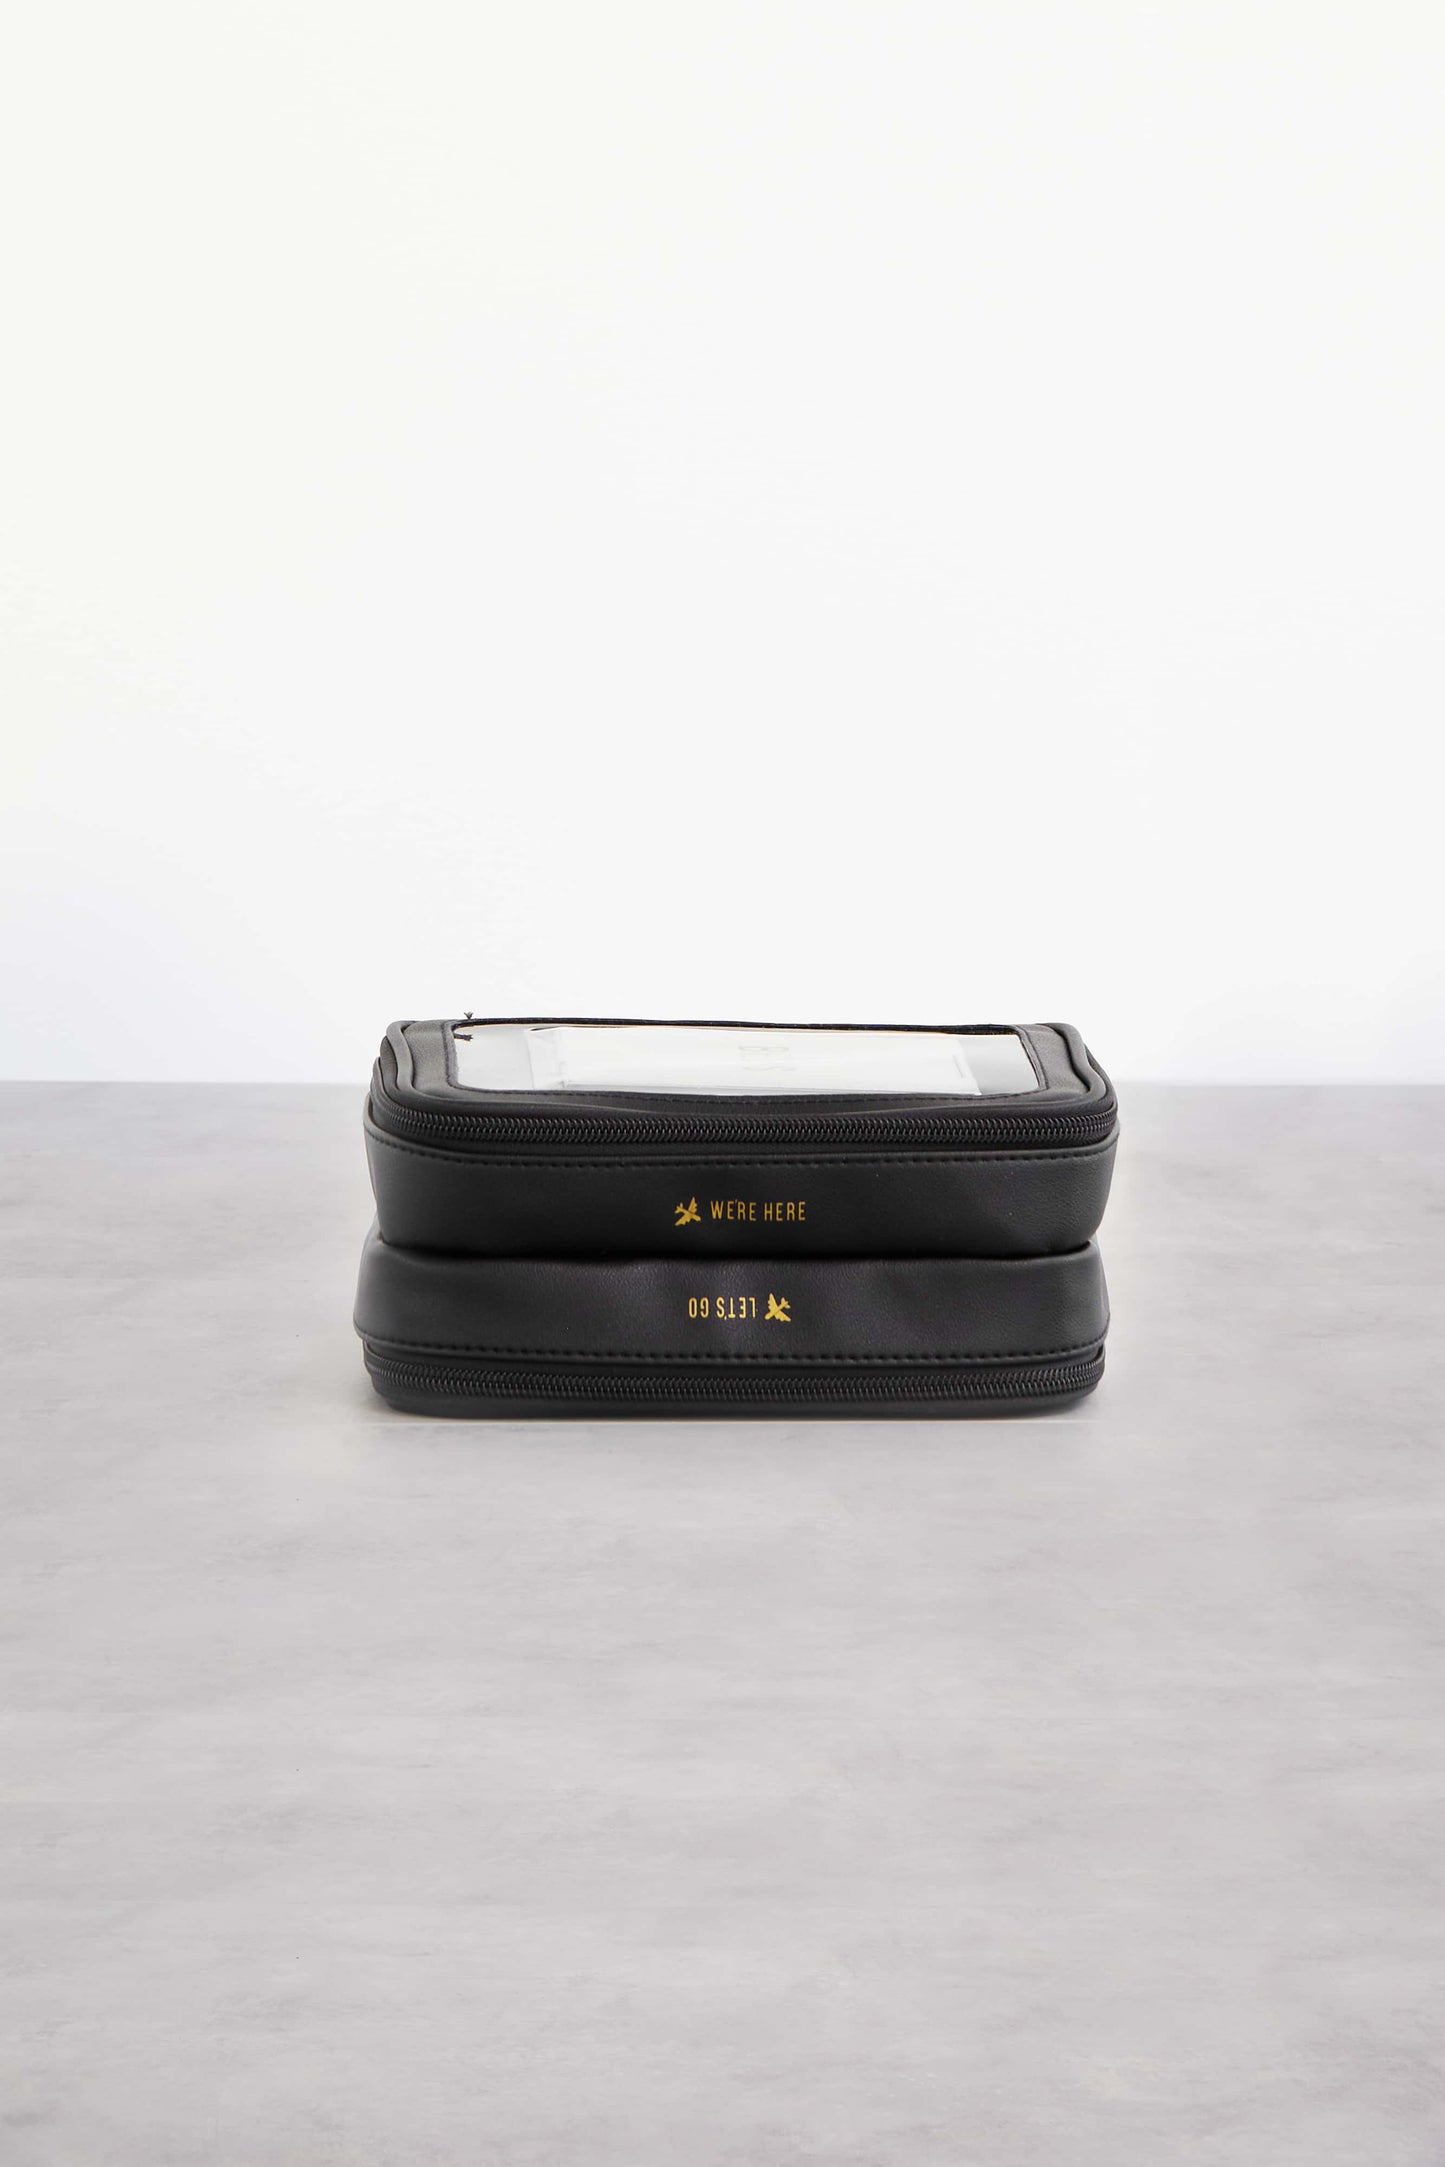 On The Go Essential Case in Black Laying on its Side Bottom Showing